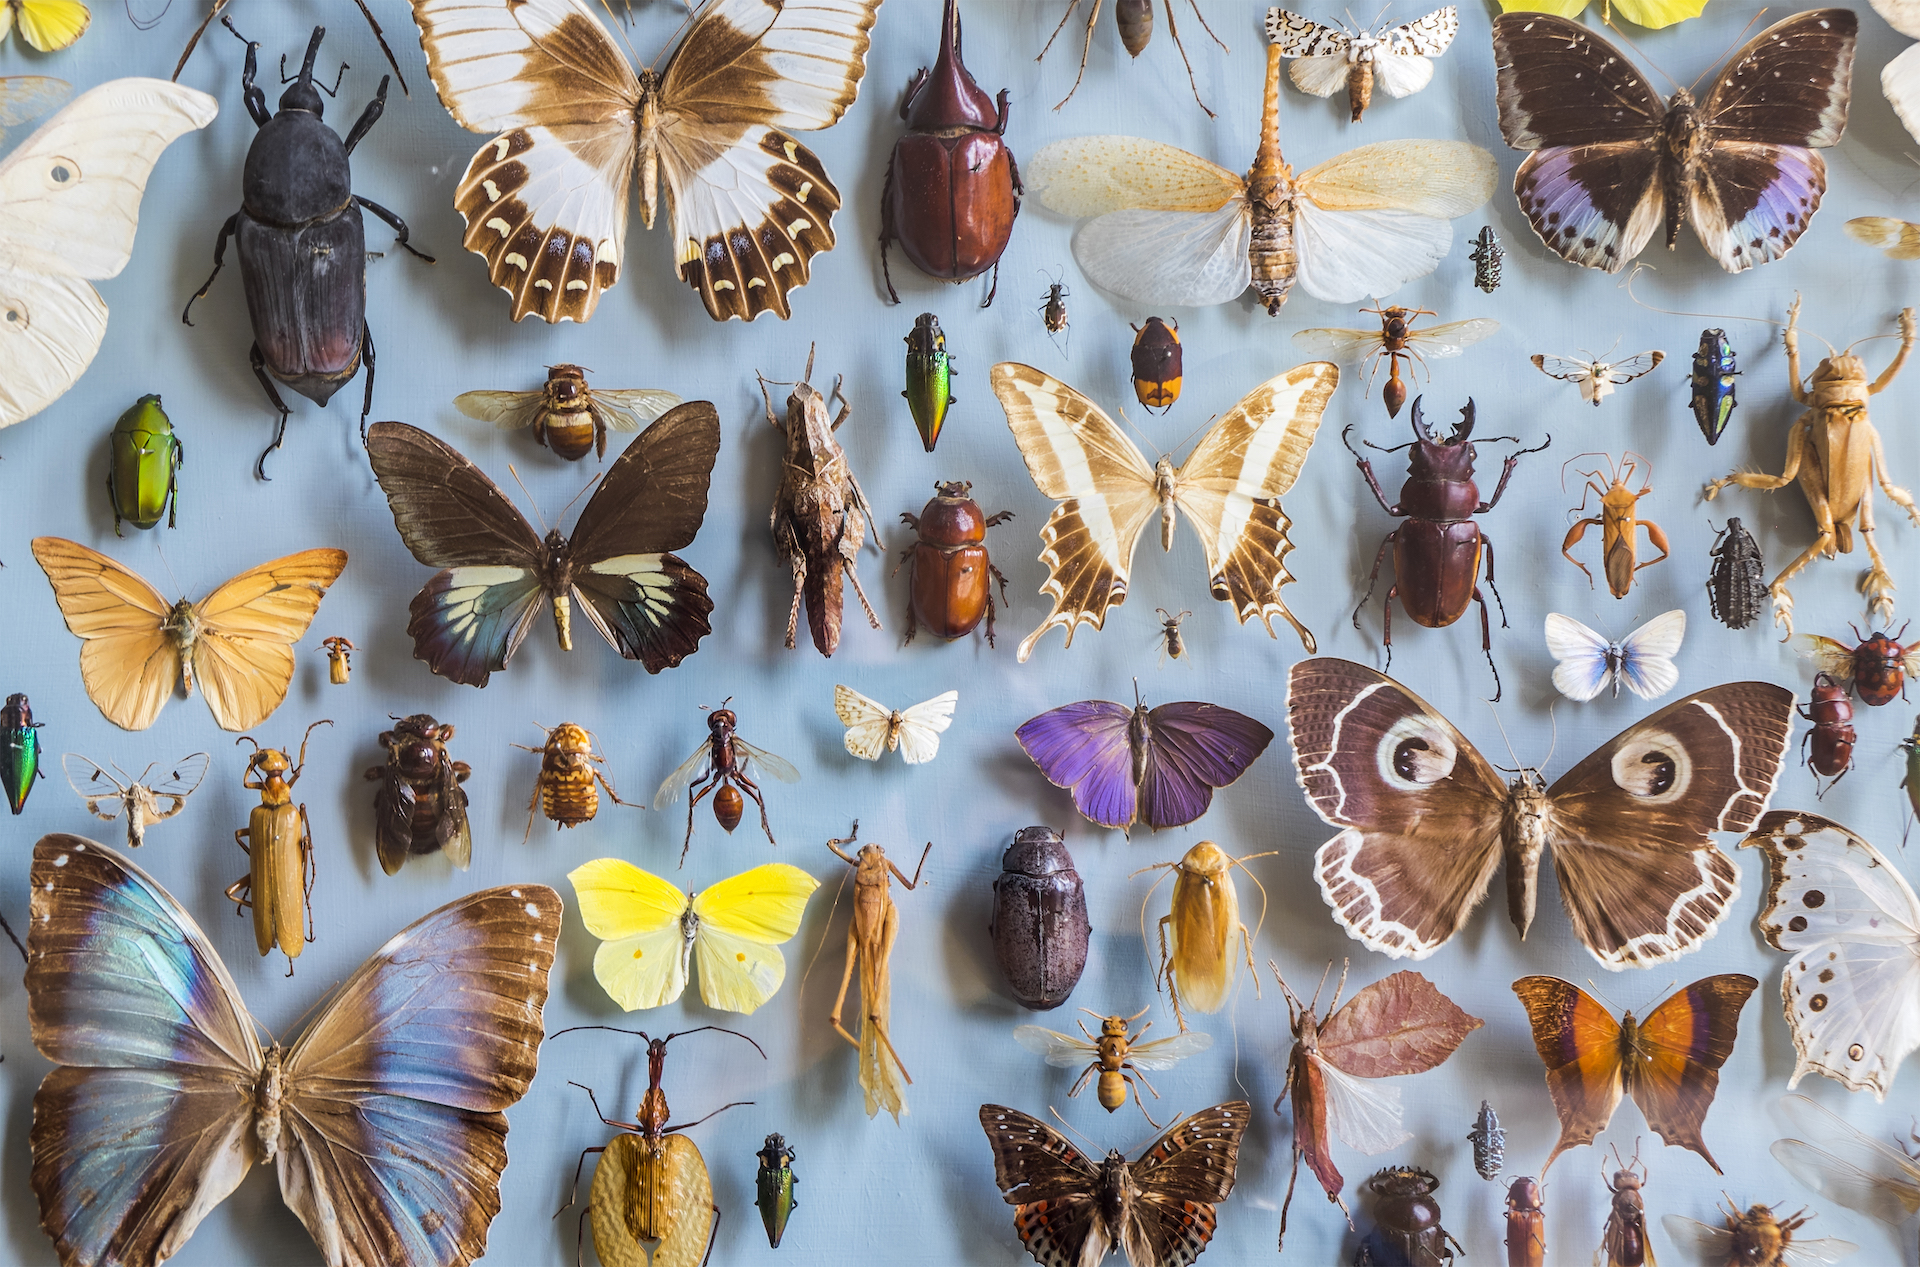 A photo of an insect exhibit with many exotic butterflies and beetles